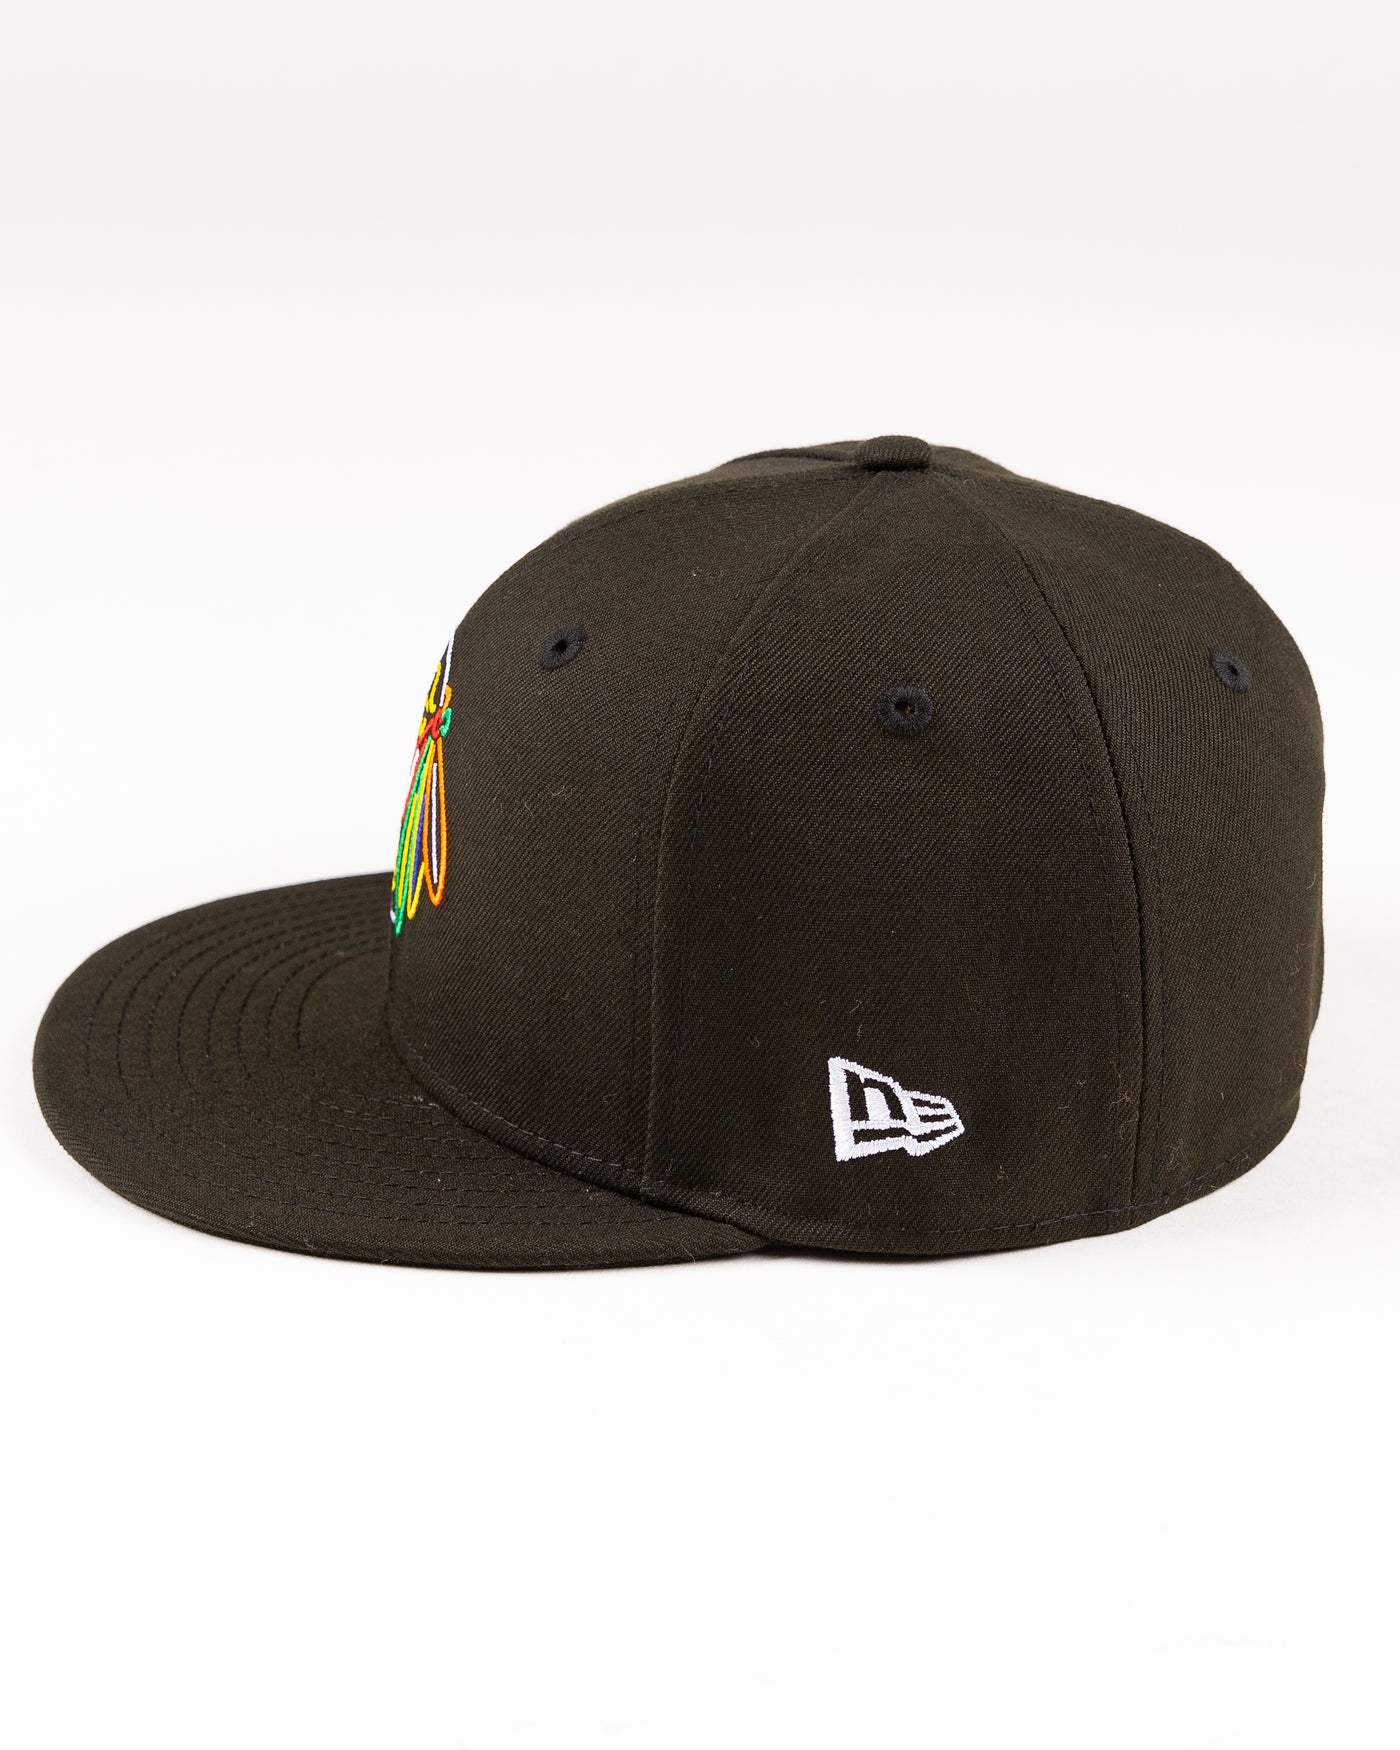 black New Era fitted cap with Chicago Blackhaks primary logo embroidered in front and secondary logo embroidered on back in neon lights colorway - left side lay flat